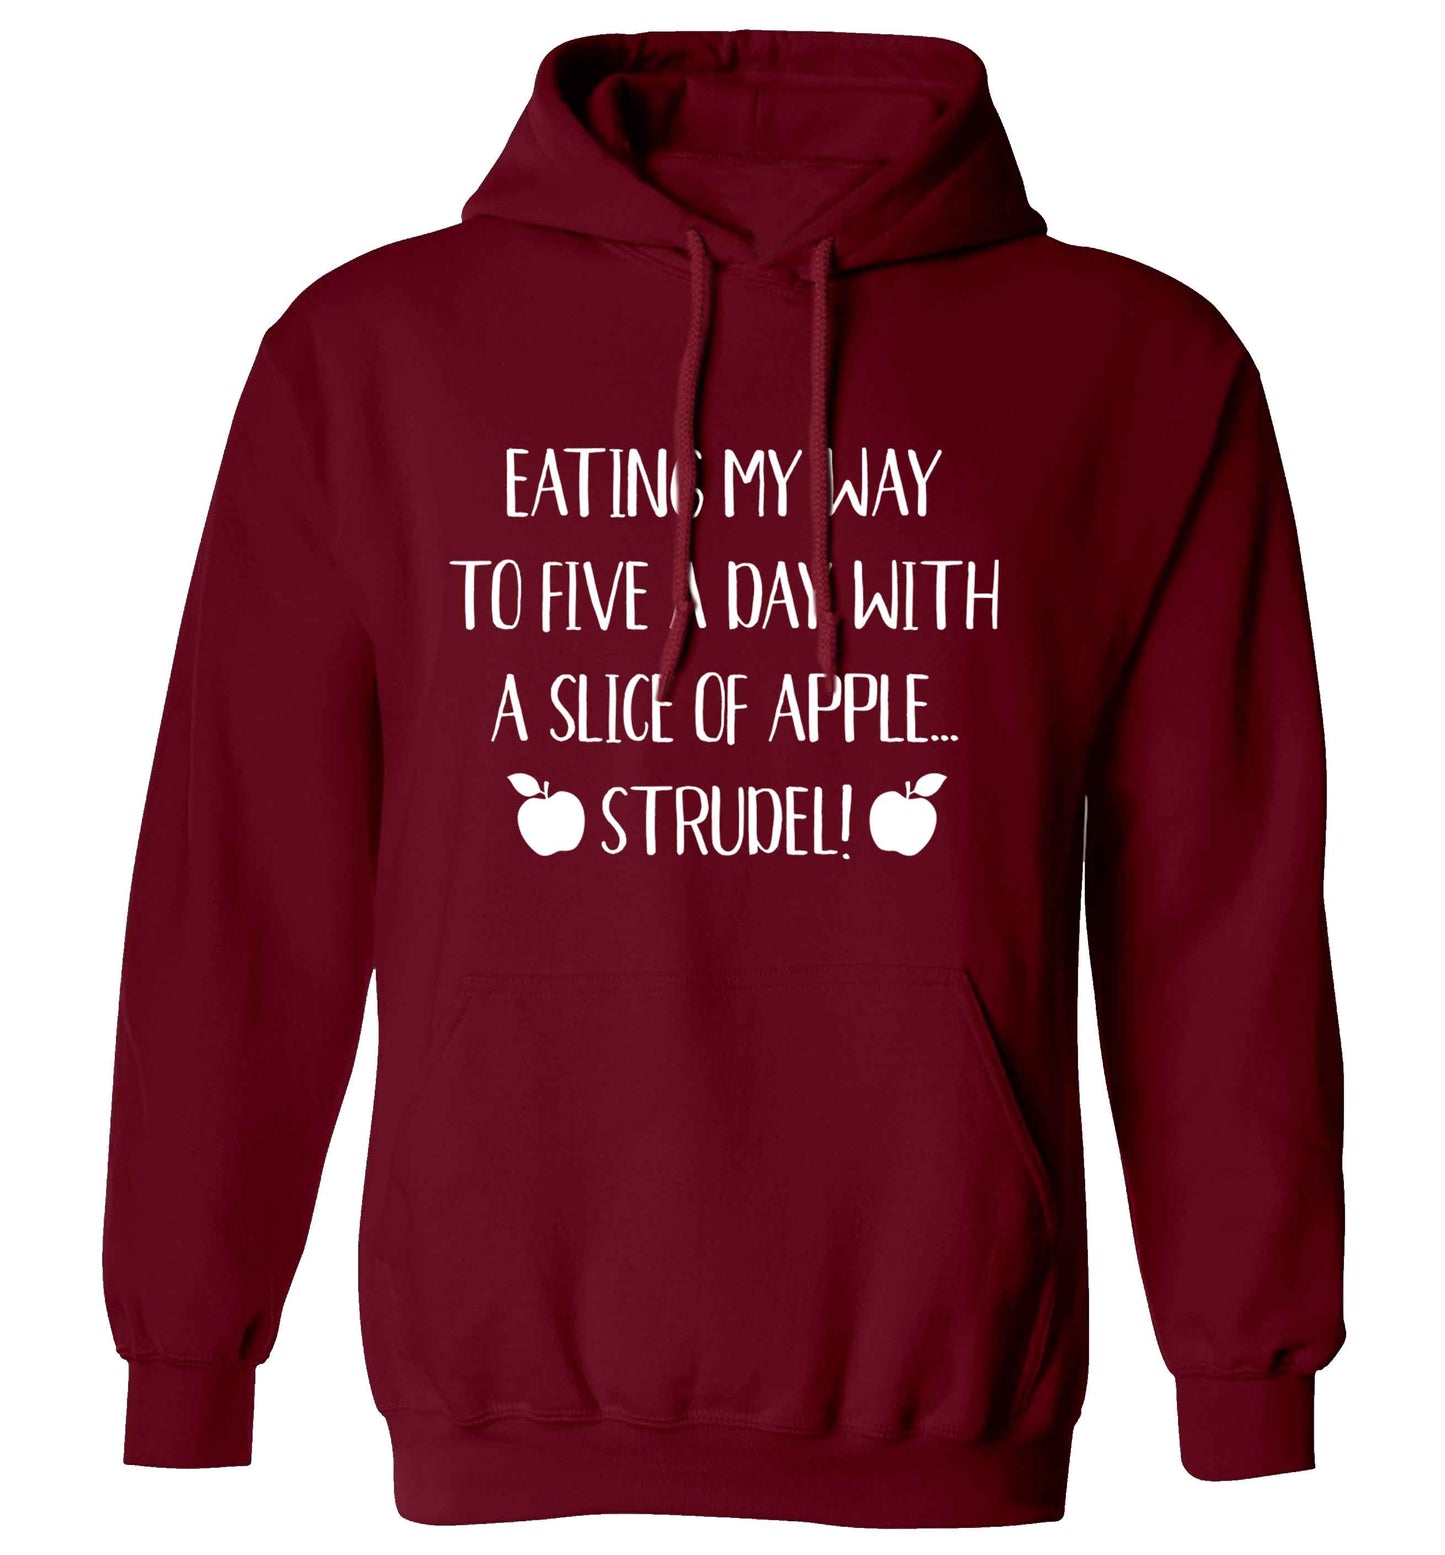 Eating my way to five a day with a slice of apple strudel adults unisex maroon hoodie 2XL